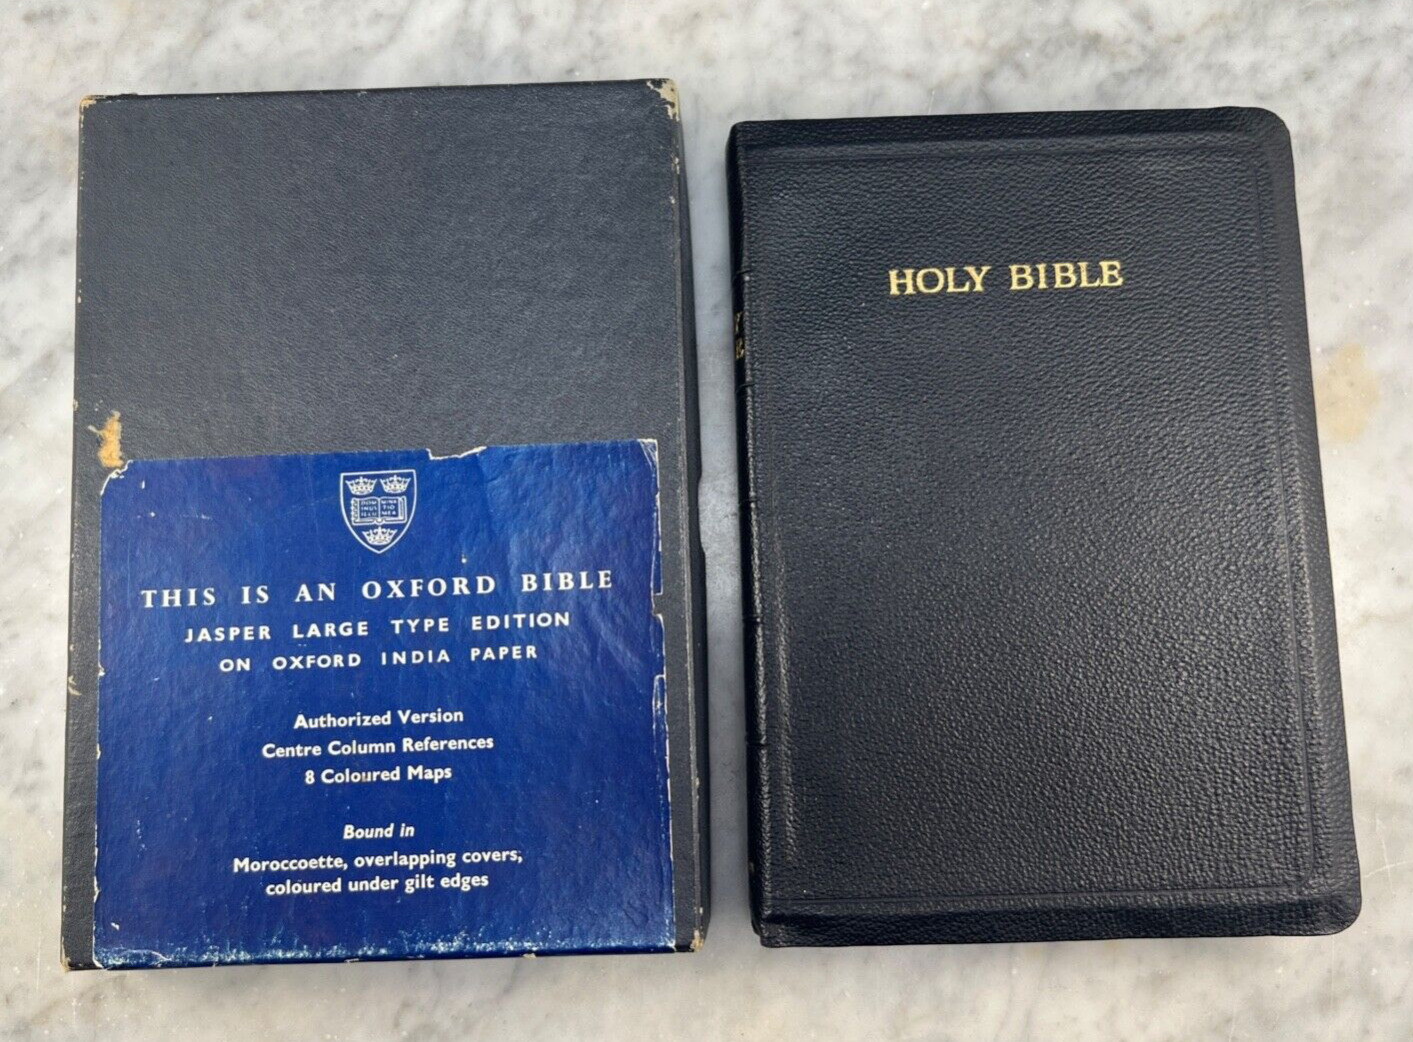 Oxford Reference Bible Vintage Black Leather in Original Box 8 Coloured Maps VGC